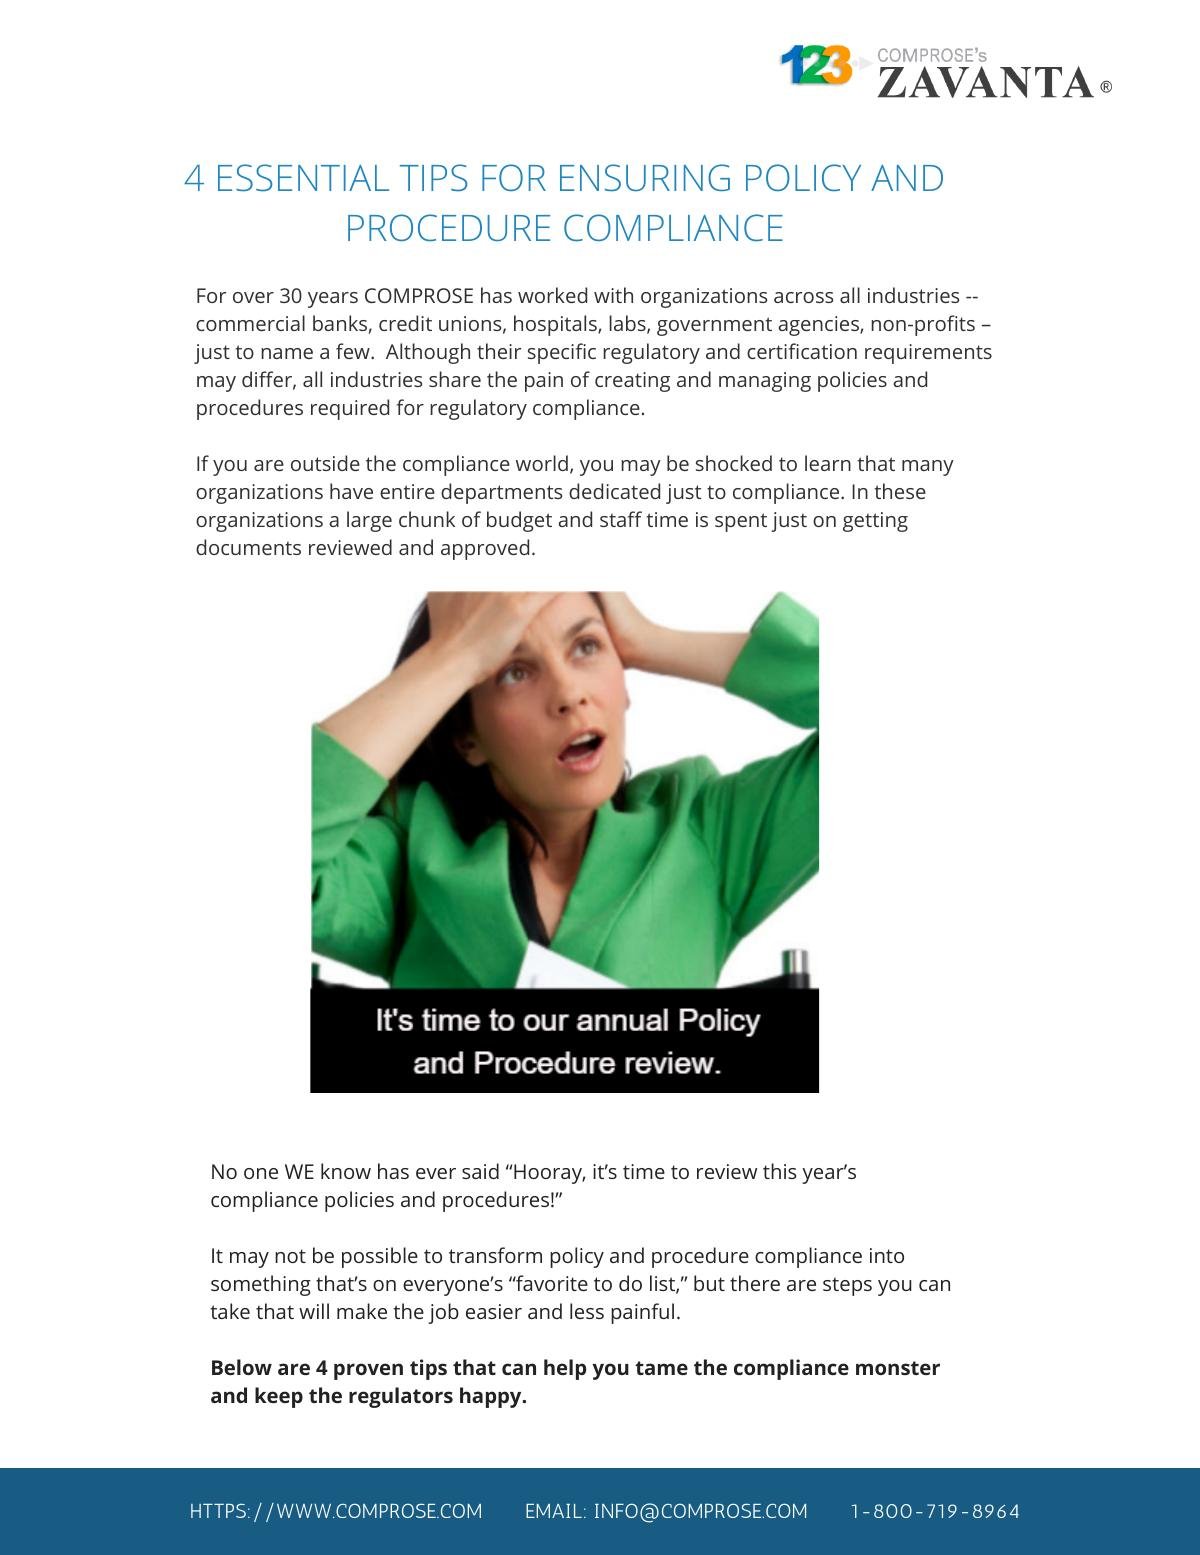 4 Essential Tips for Ensuring Policy & Procedure Compliance